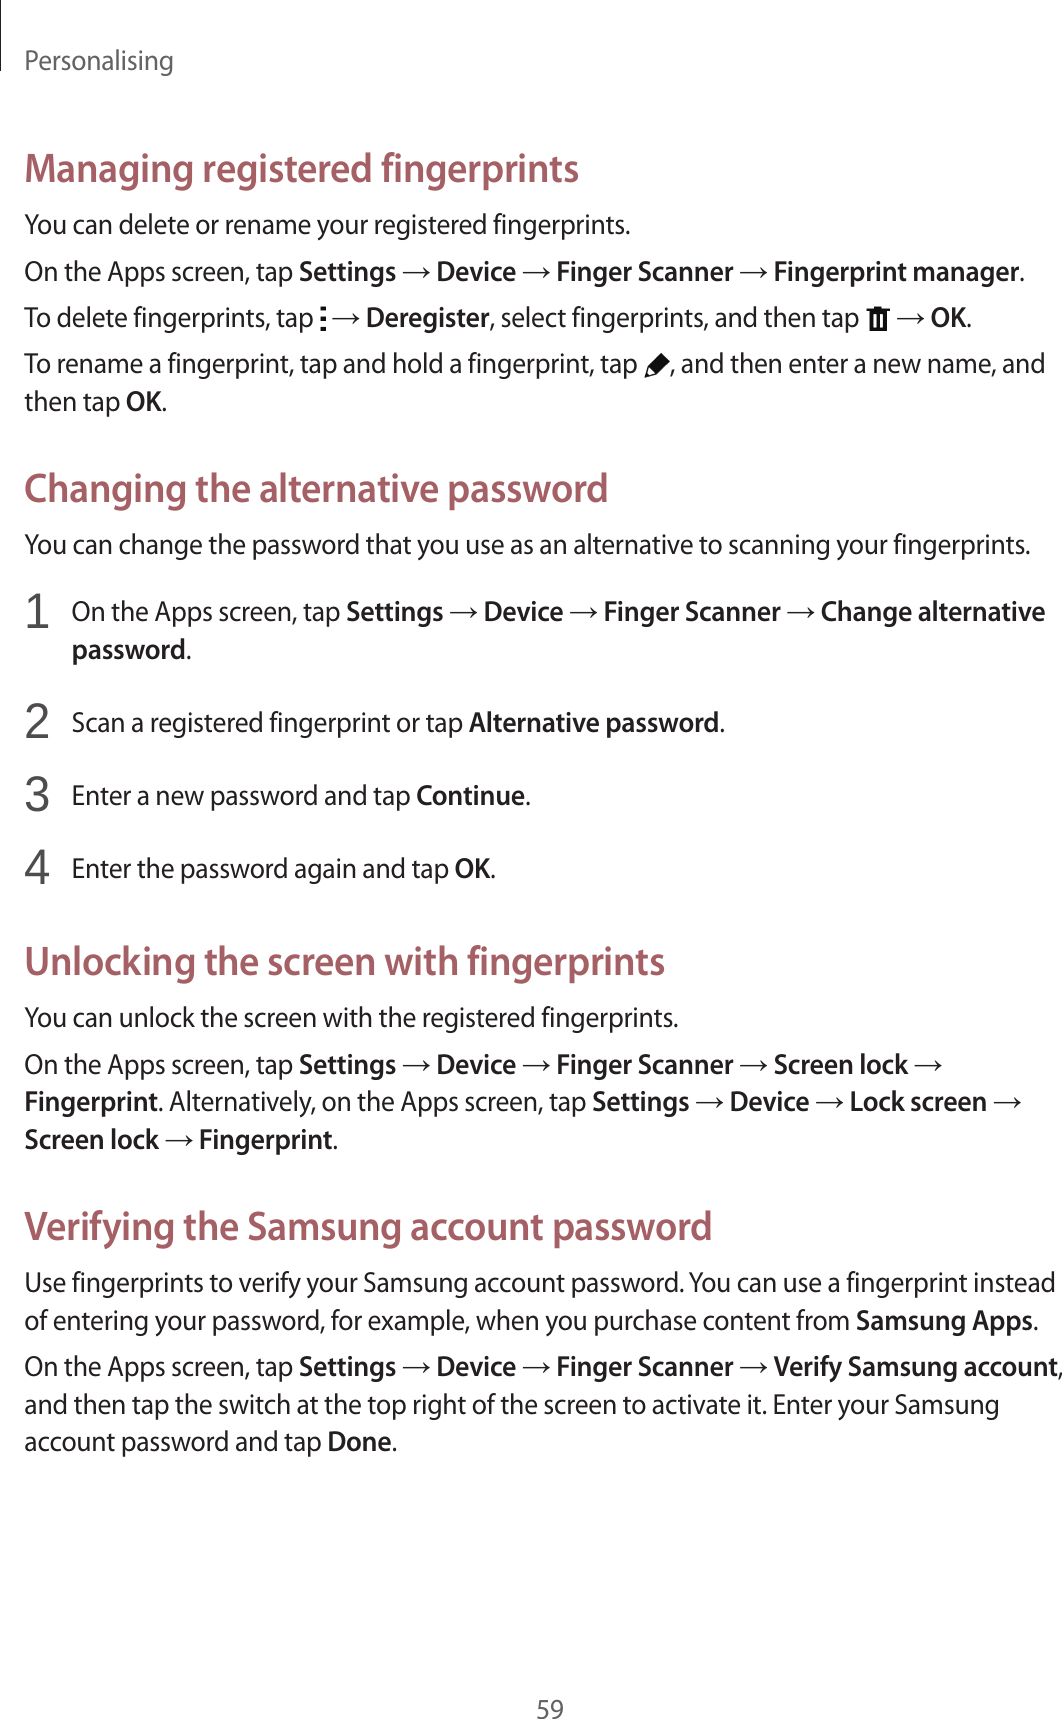 Personalising59Managing registered fingerprintsYou can delete or rename your registered fingerprints.On the Apps screen, tap Settings → Device → Finger Scanner → Fingerprint manager.To delete fingerprints, tap   → Deregister, select fingerprints, and then tap   → OK.To rename a fingerprint, tap and hold a fingerprint, tap  , and then enter a new name, and then tap OK.Changing the alternative passwordYou can change the password that you use as an alternative to scanning your fingerprints.1  On the Apps screen, tap Settings → Device → Finger Scanner → Change alternative password.2  Scan a registered fingerprint or tap Alternative password.3  Enter a new password and tap Continue.4  Enter the password again and tap OK.Unlocking the screen with fingerprintsYou can unlock the screen with the registered fingerprints.On the Apps screen, tap Settings → Device → Finger Scanner → Screen lock → Fingerprint. Alternatively, on the Apps screen, tap Settings → Device → Lock screen → Screen lock → Fingerprint.Verifying the Samsung account passwordUse fingerprints to verify your Samsung account password. You can use a fingerprint instead of entering your password, for example, when you purchase content from Samsung Apps.On the Apps screen, tap Settings → Device → Finger Scanner → Verify Samsung account, and then tap the switch at the top right of the screen to activate it. Enter your Samsung account password and tap Done.